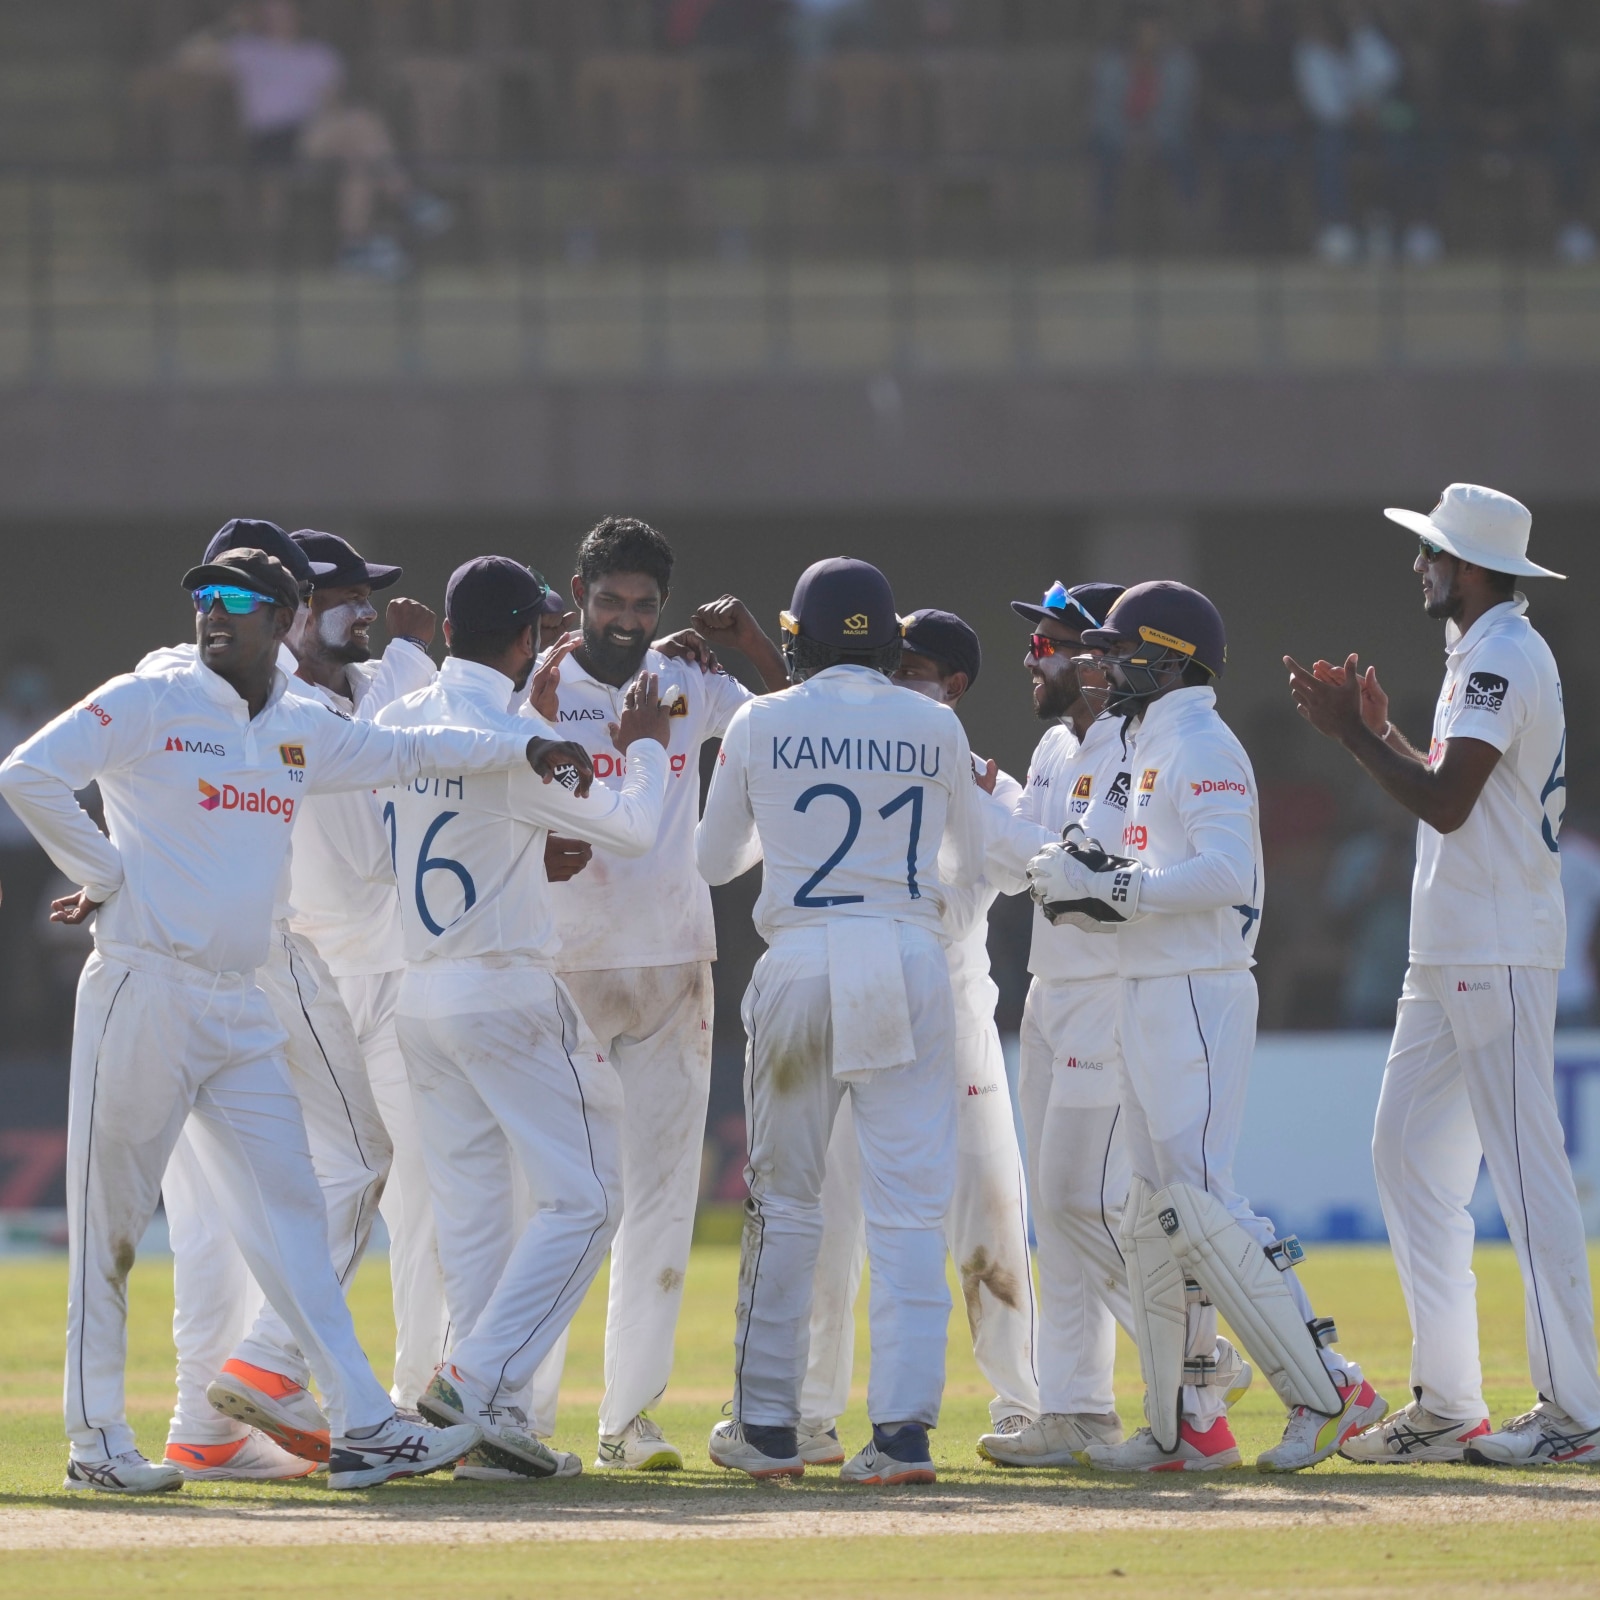 Live Score Sri Lanka vs Pakistan, 1st Test Updates When And Where to Watch - Live Streaming SL vs PAK Online and Telecast on TV